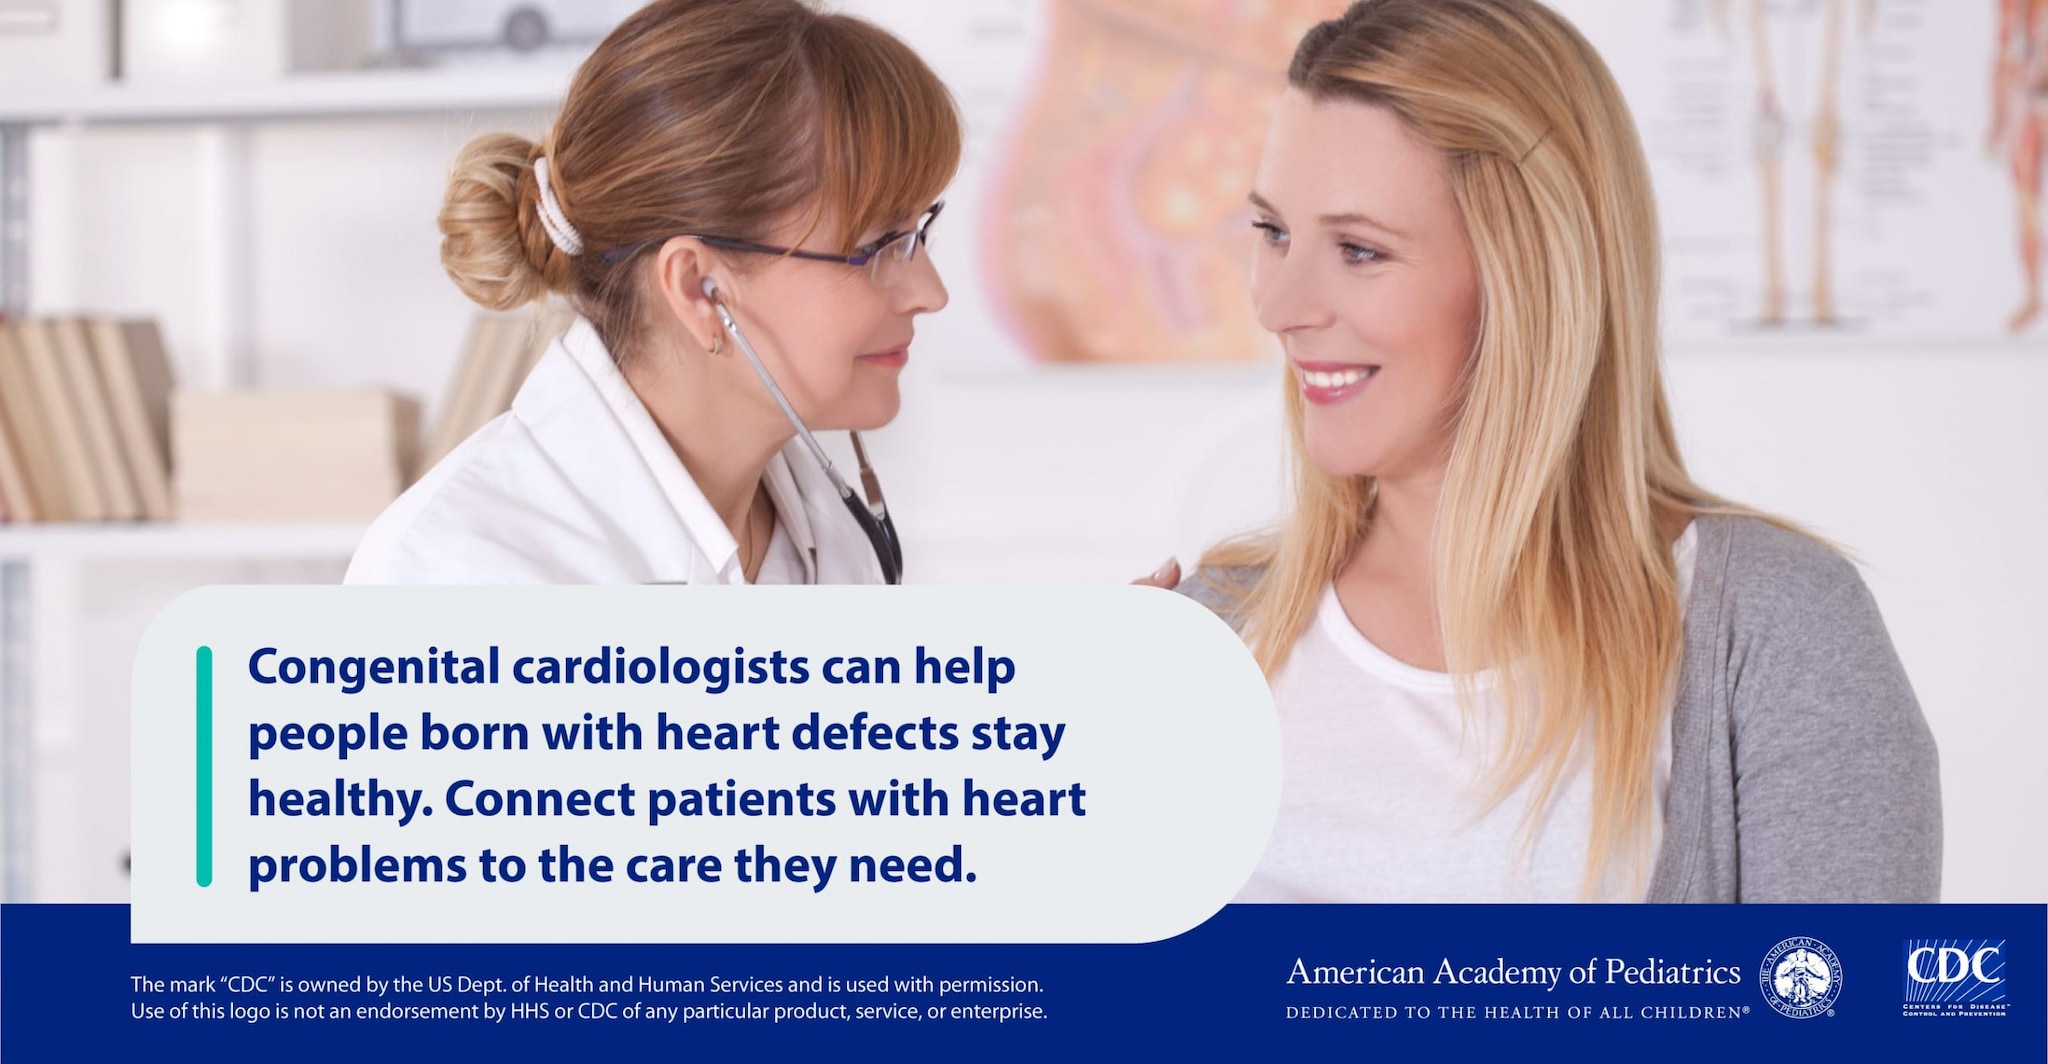 The background shows a person talking with a doctor and the foreground includes this text "Congenital cardiologists can help people with heart defects stay healthy. Connect patients with heart problems to the care they need."